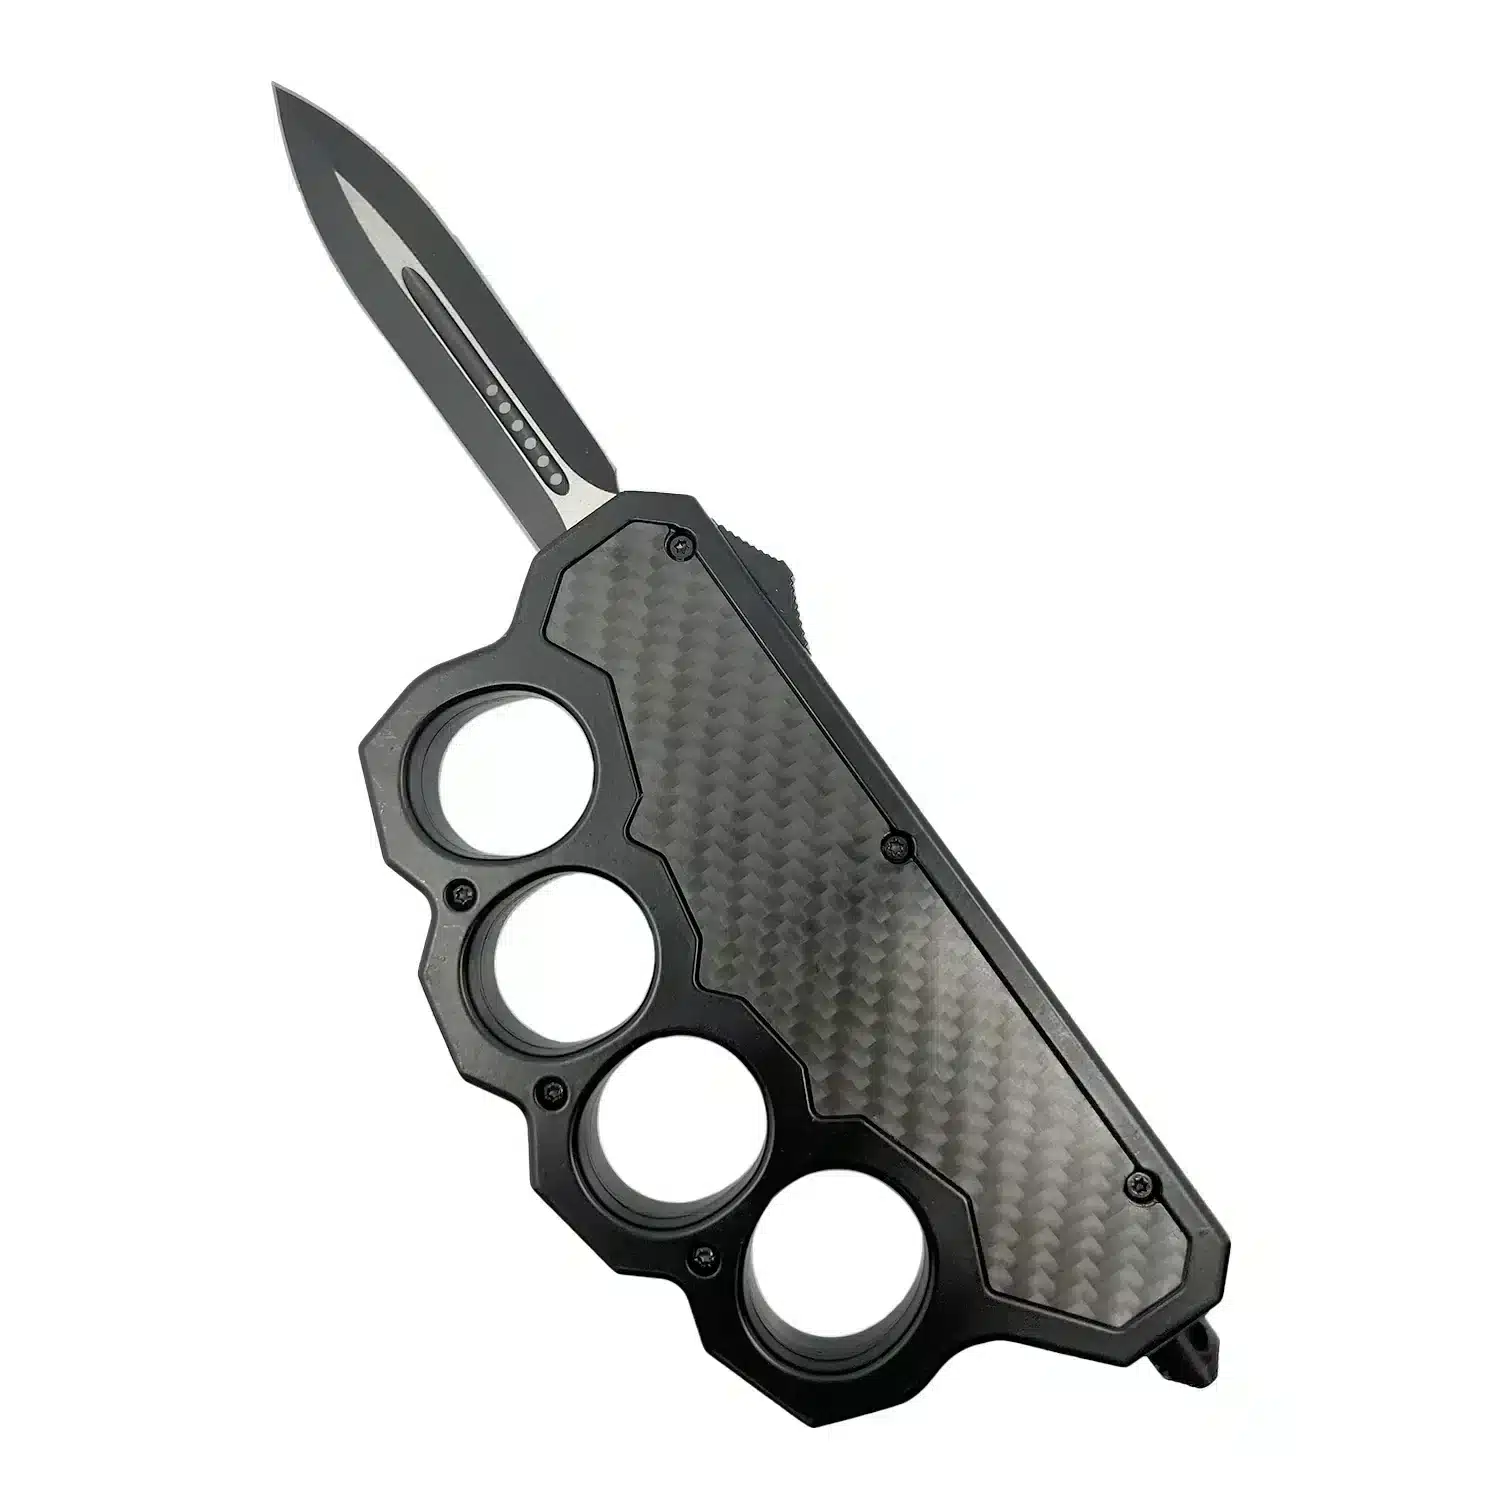 Amazon.com: Trench Knife With Knuckles